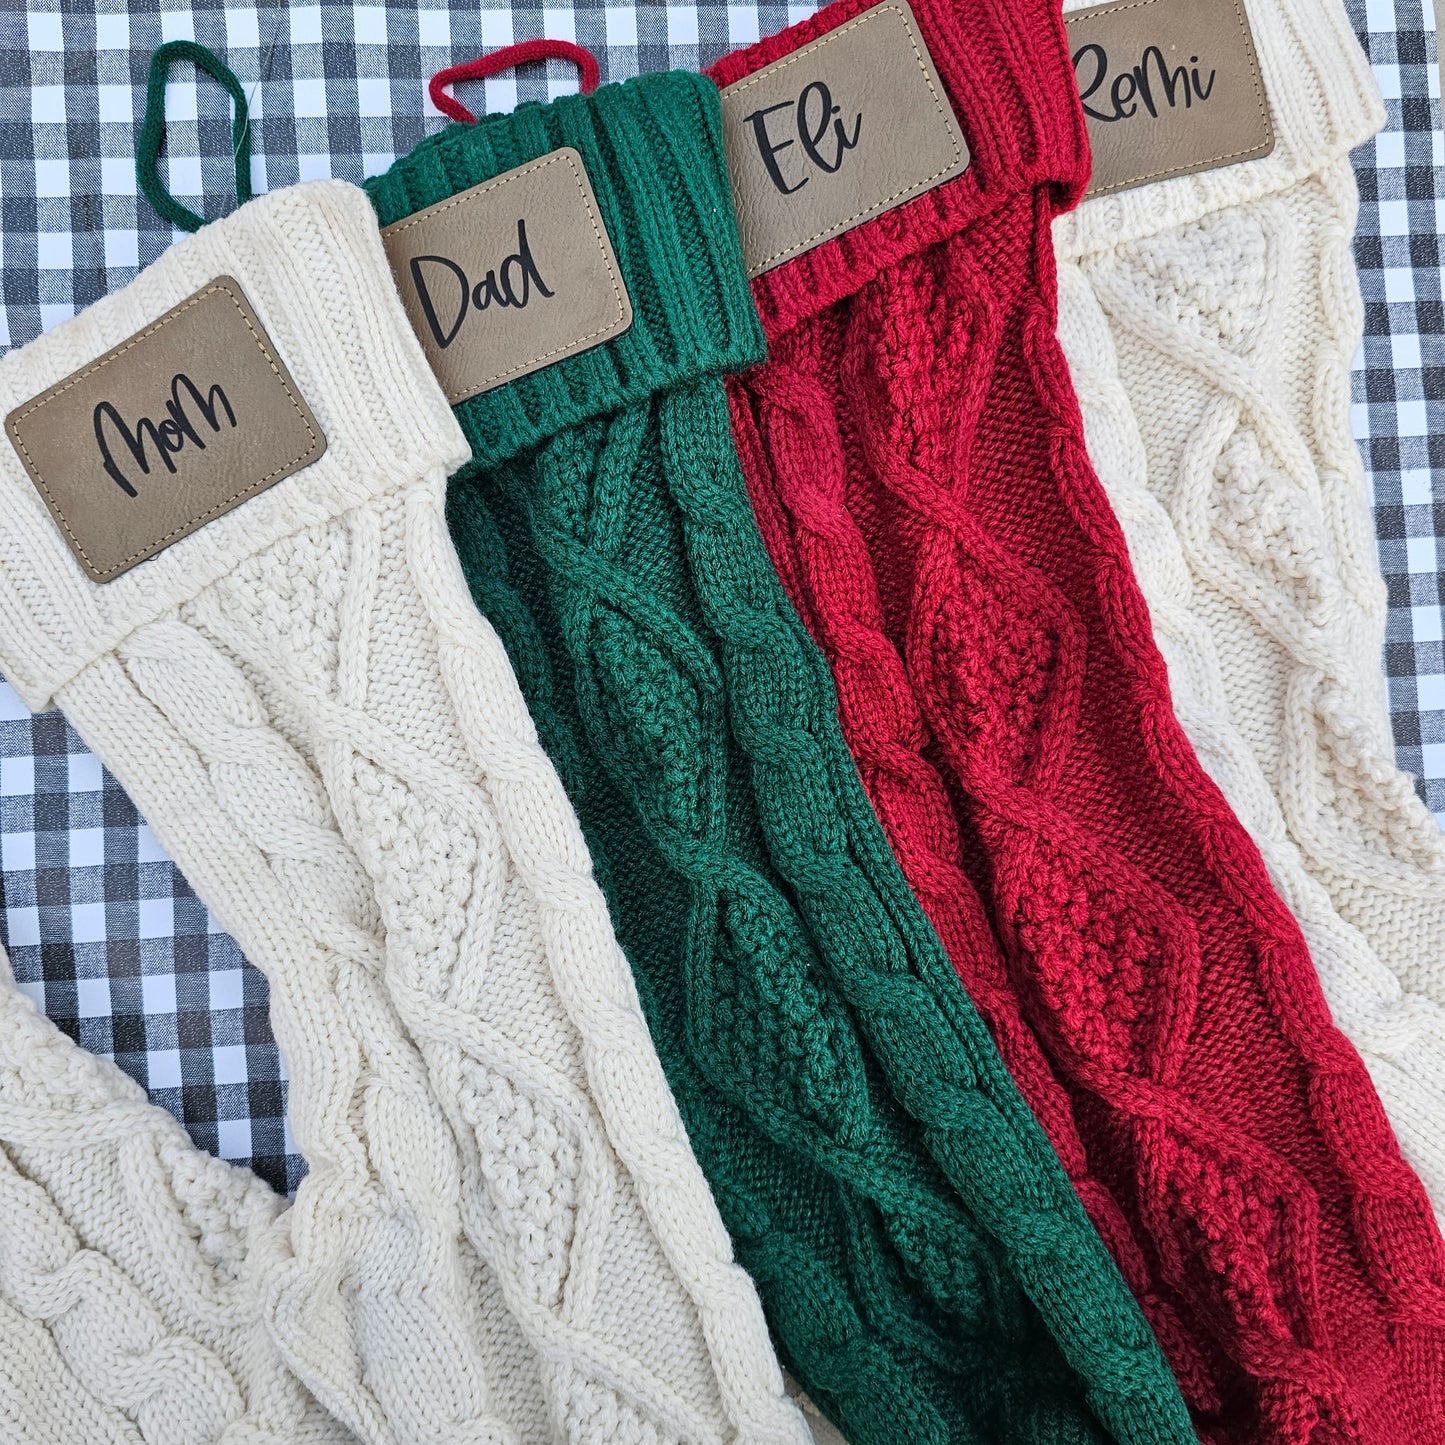 Personalized Cable Knit Stocking - 18"